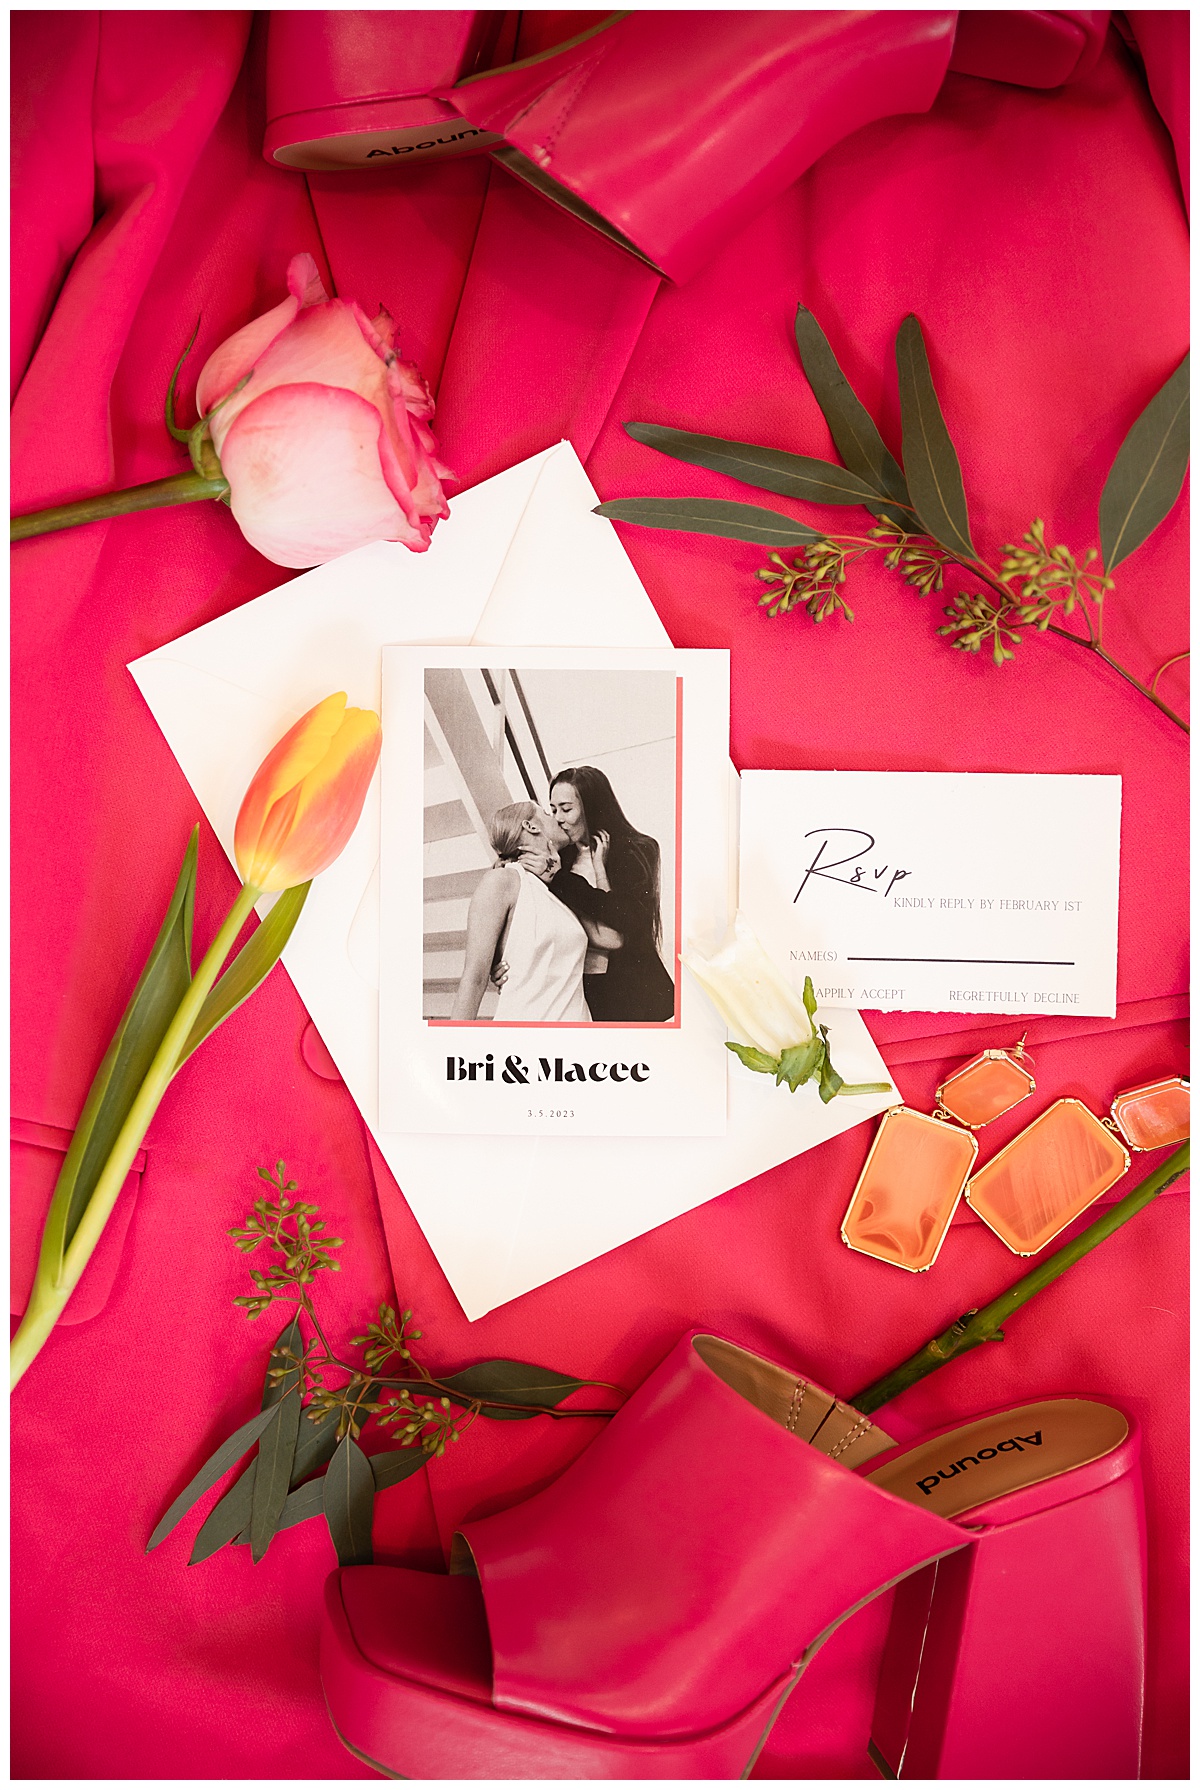 A bright pink flat lay with an invitation, flower cuttings, jewelry, and shoes is the perfect companion to this summer wedding inspiration photo shoot.